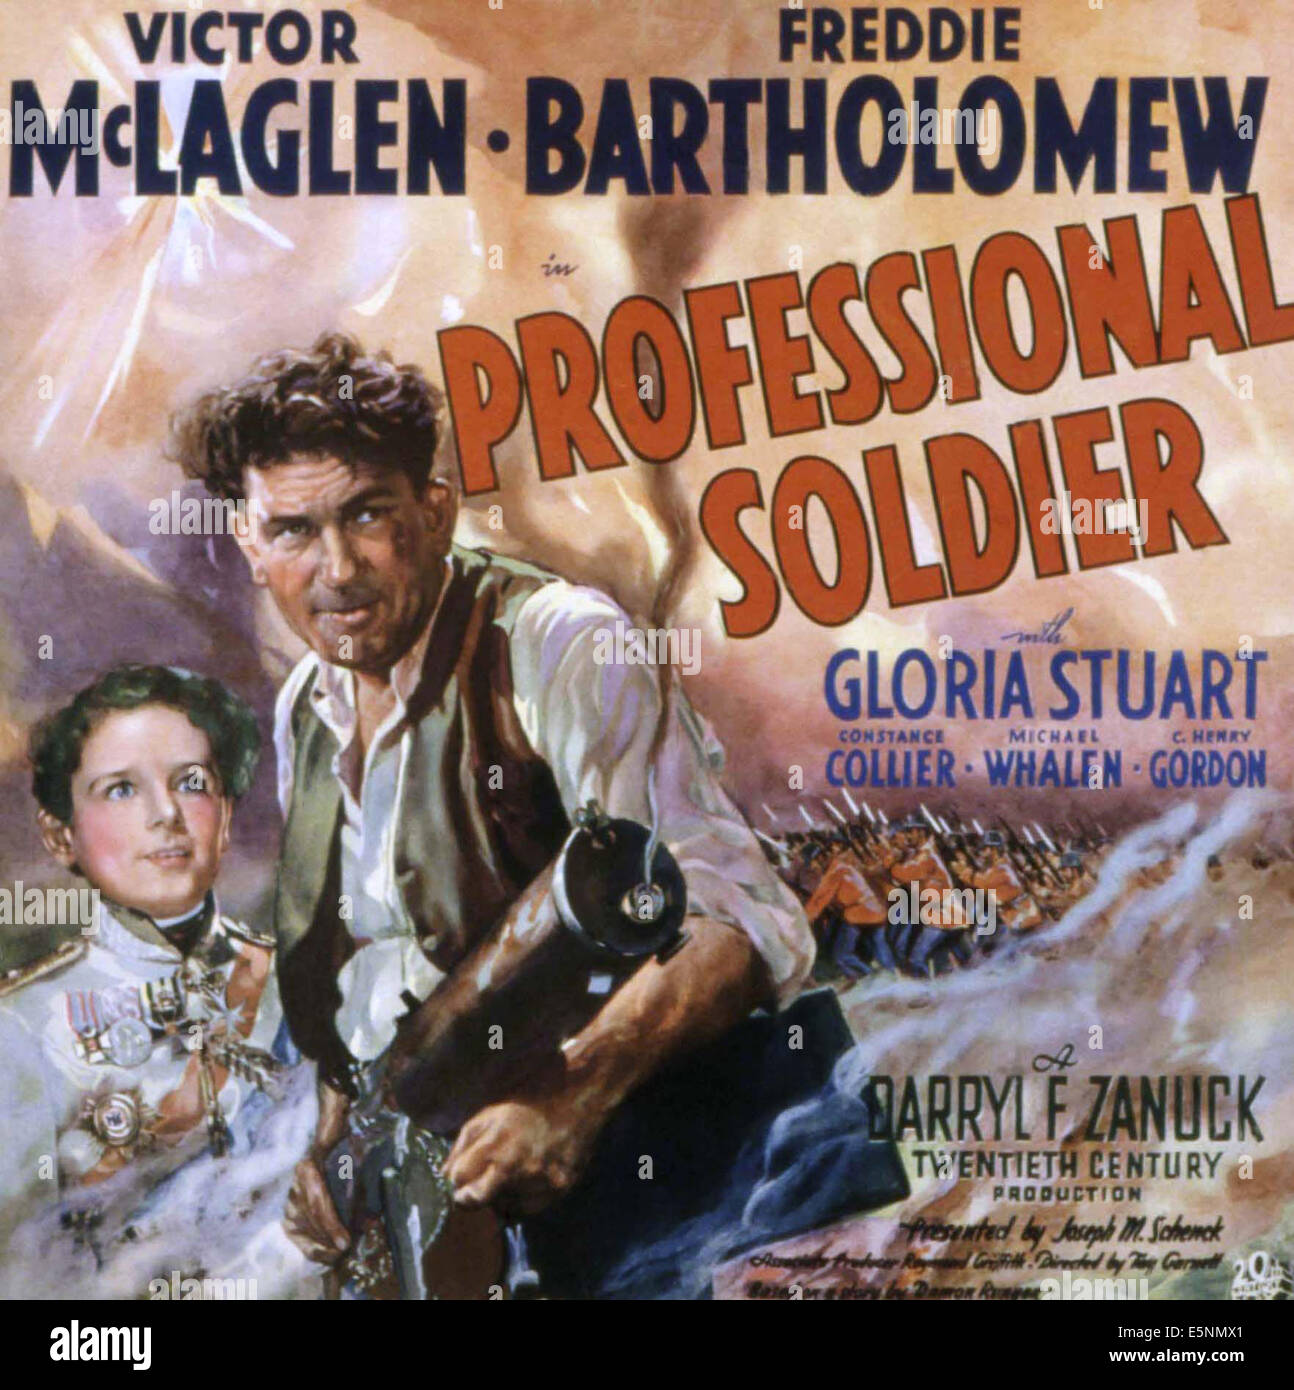 PROFESSIONAL SOLDIER, Freddie Bartholomew, Victor McLaglen, 1935, TM and copyright ©20th Century Fox Film Corp. All rights Stock Photo